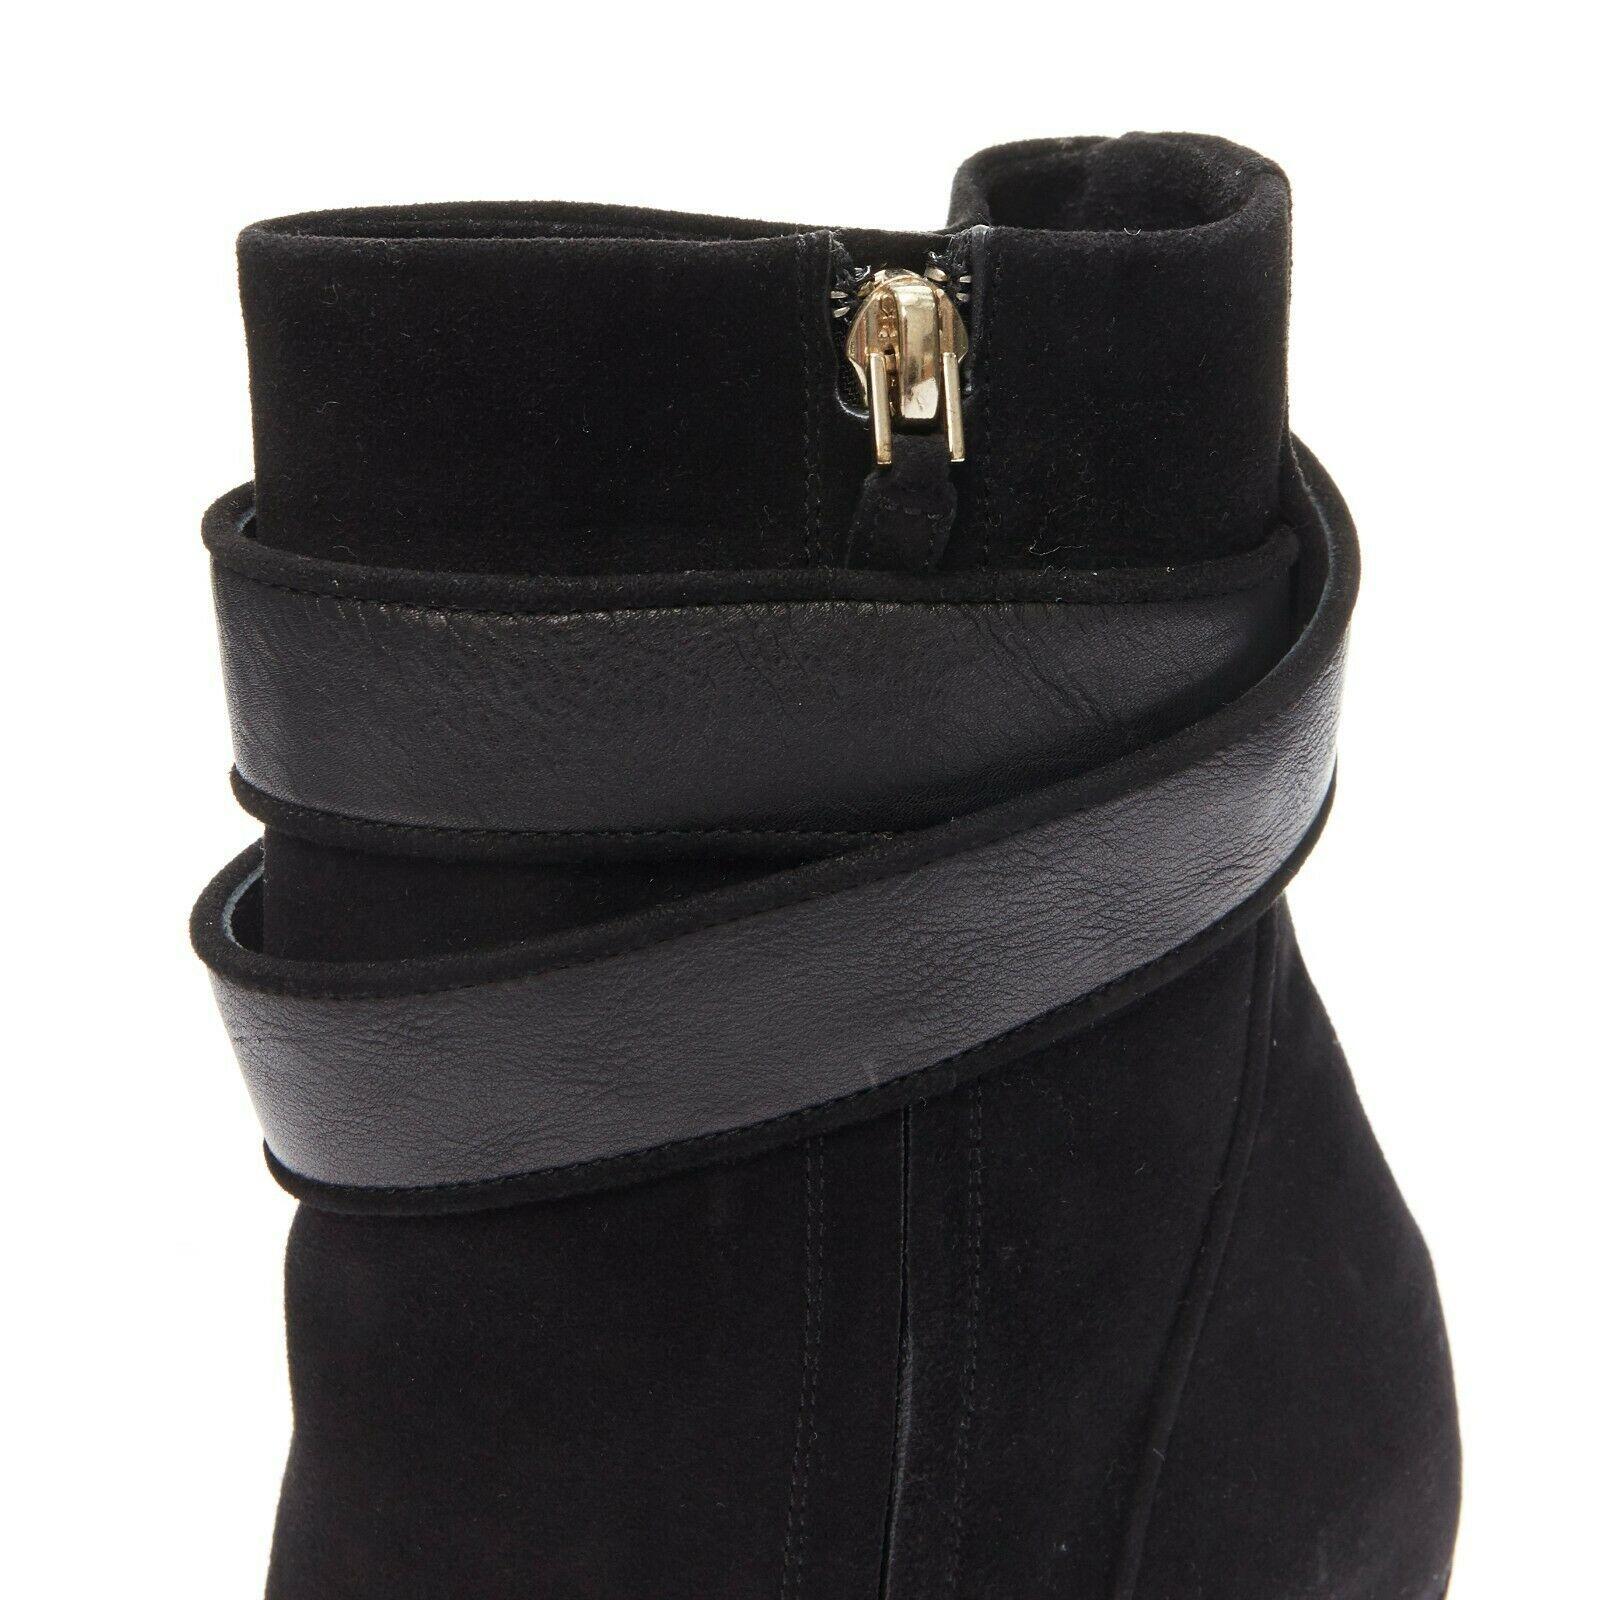 GIVENCHY black suede gold shark tooth lock clasp closure wedge booties EU36.5 3